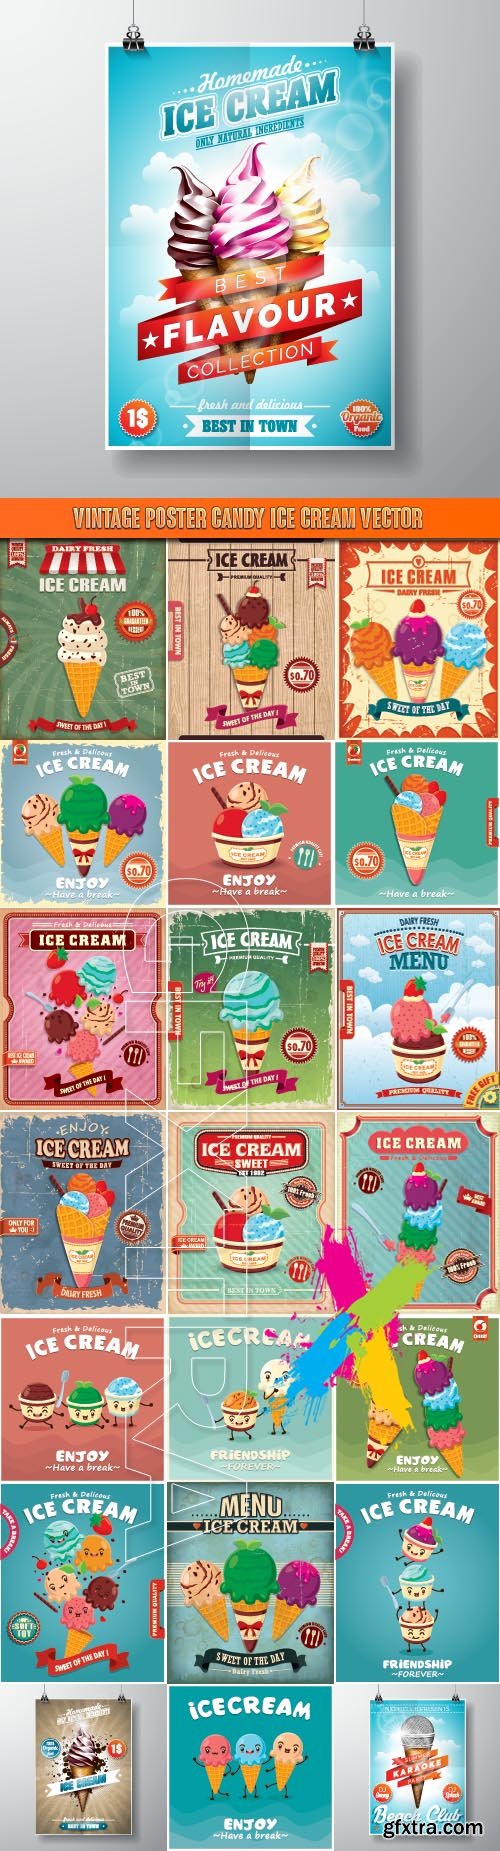 Vintage poster candy ice cream vector